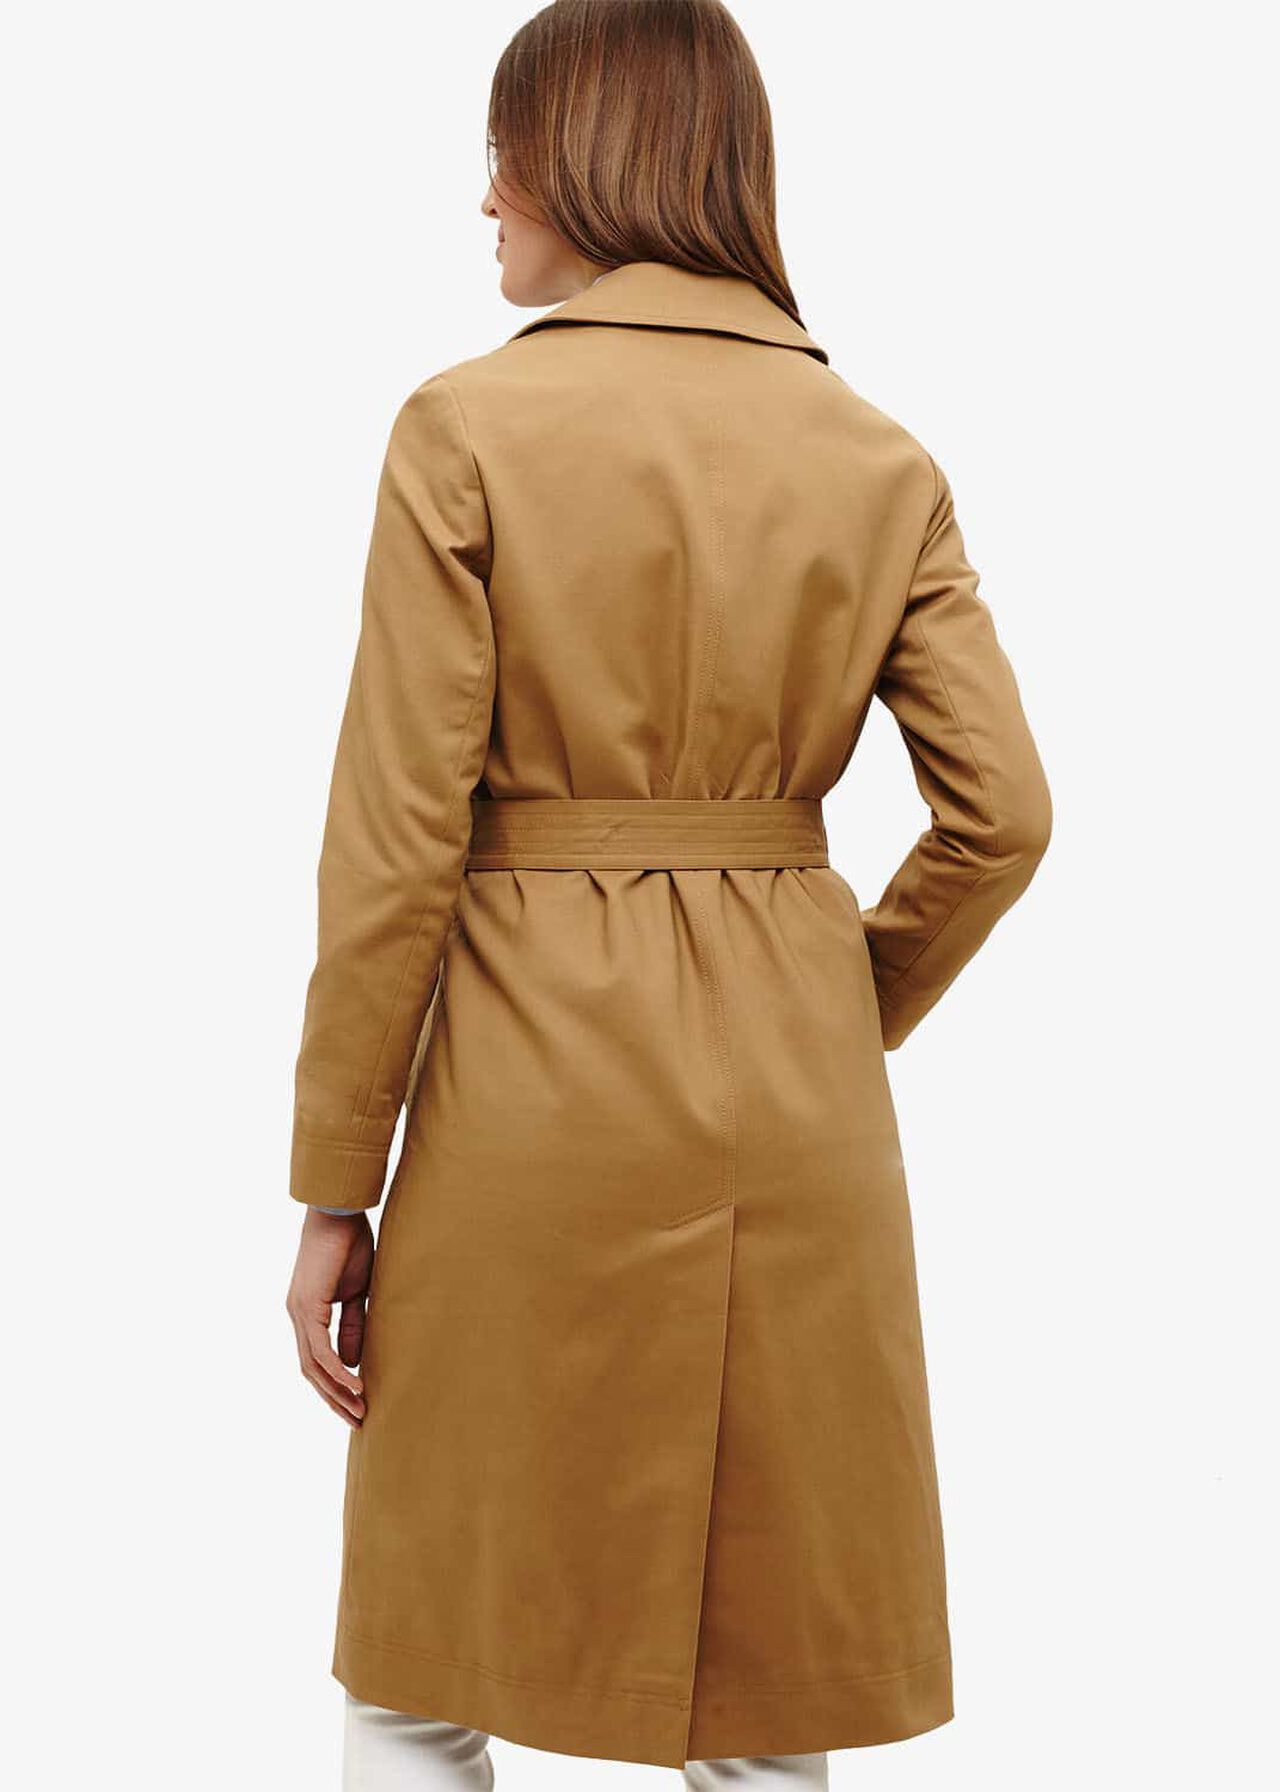 Tayte Belted Trench Coat